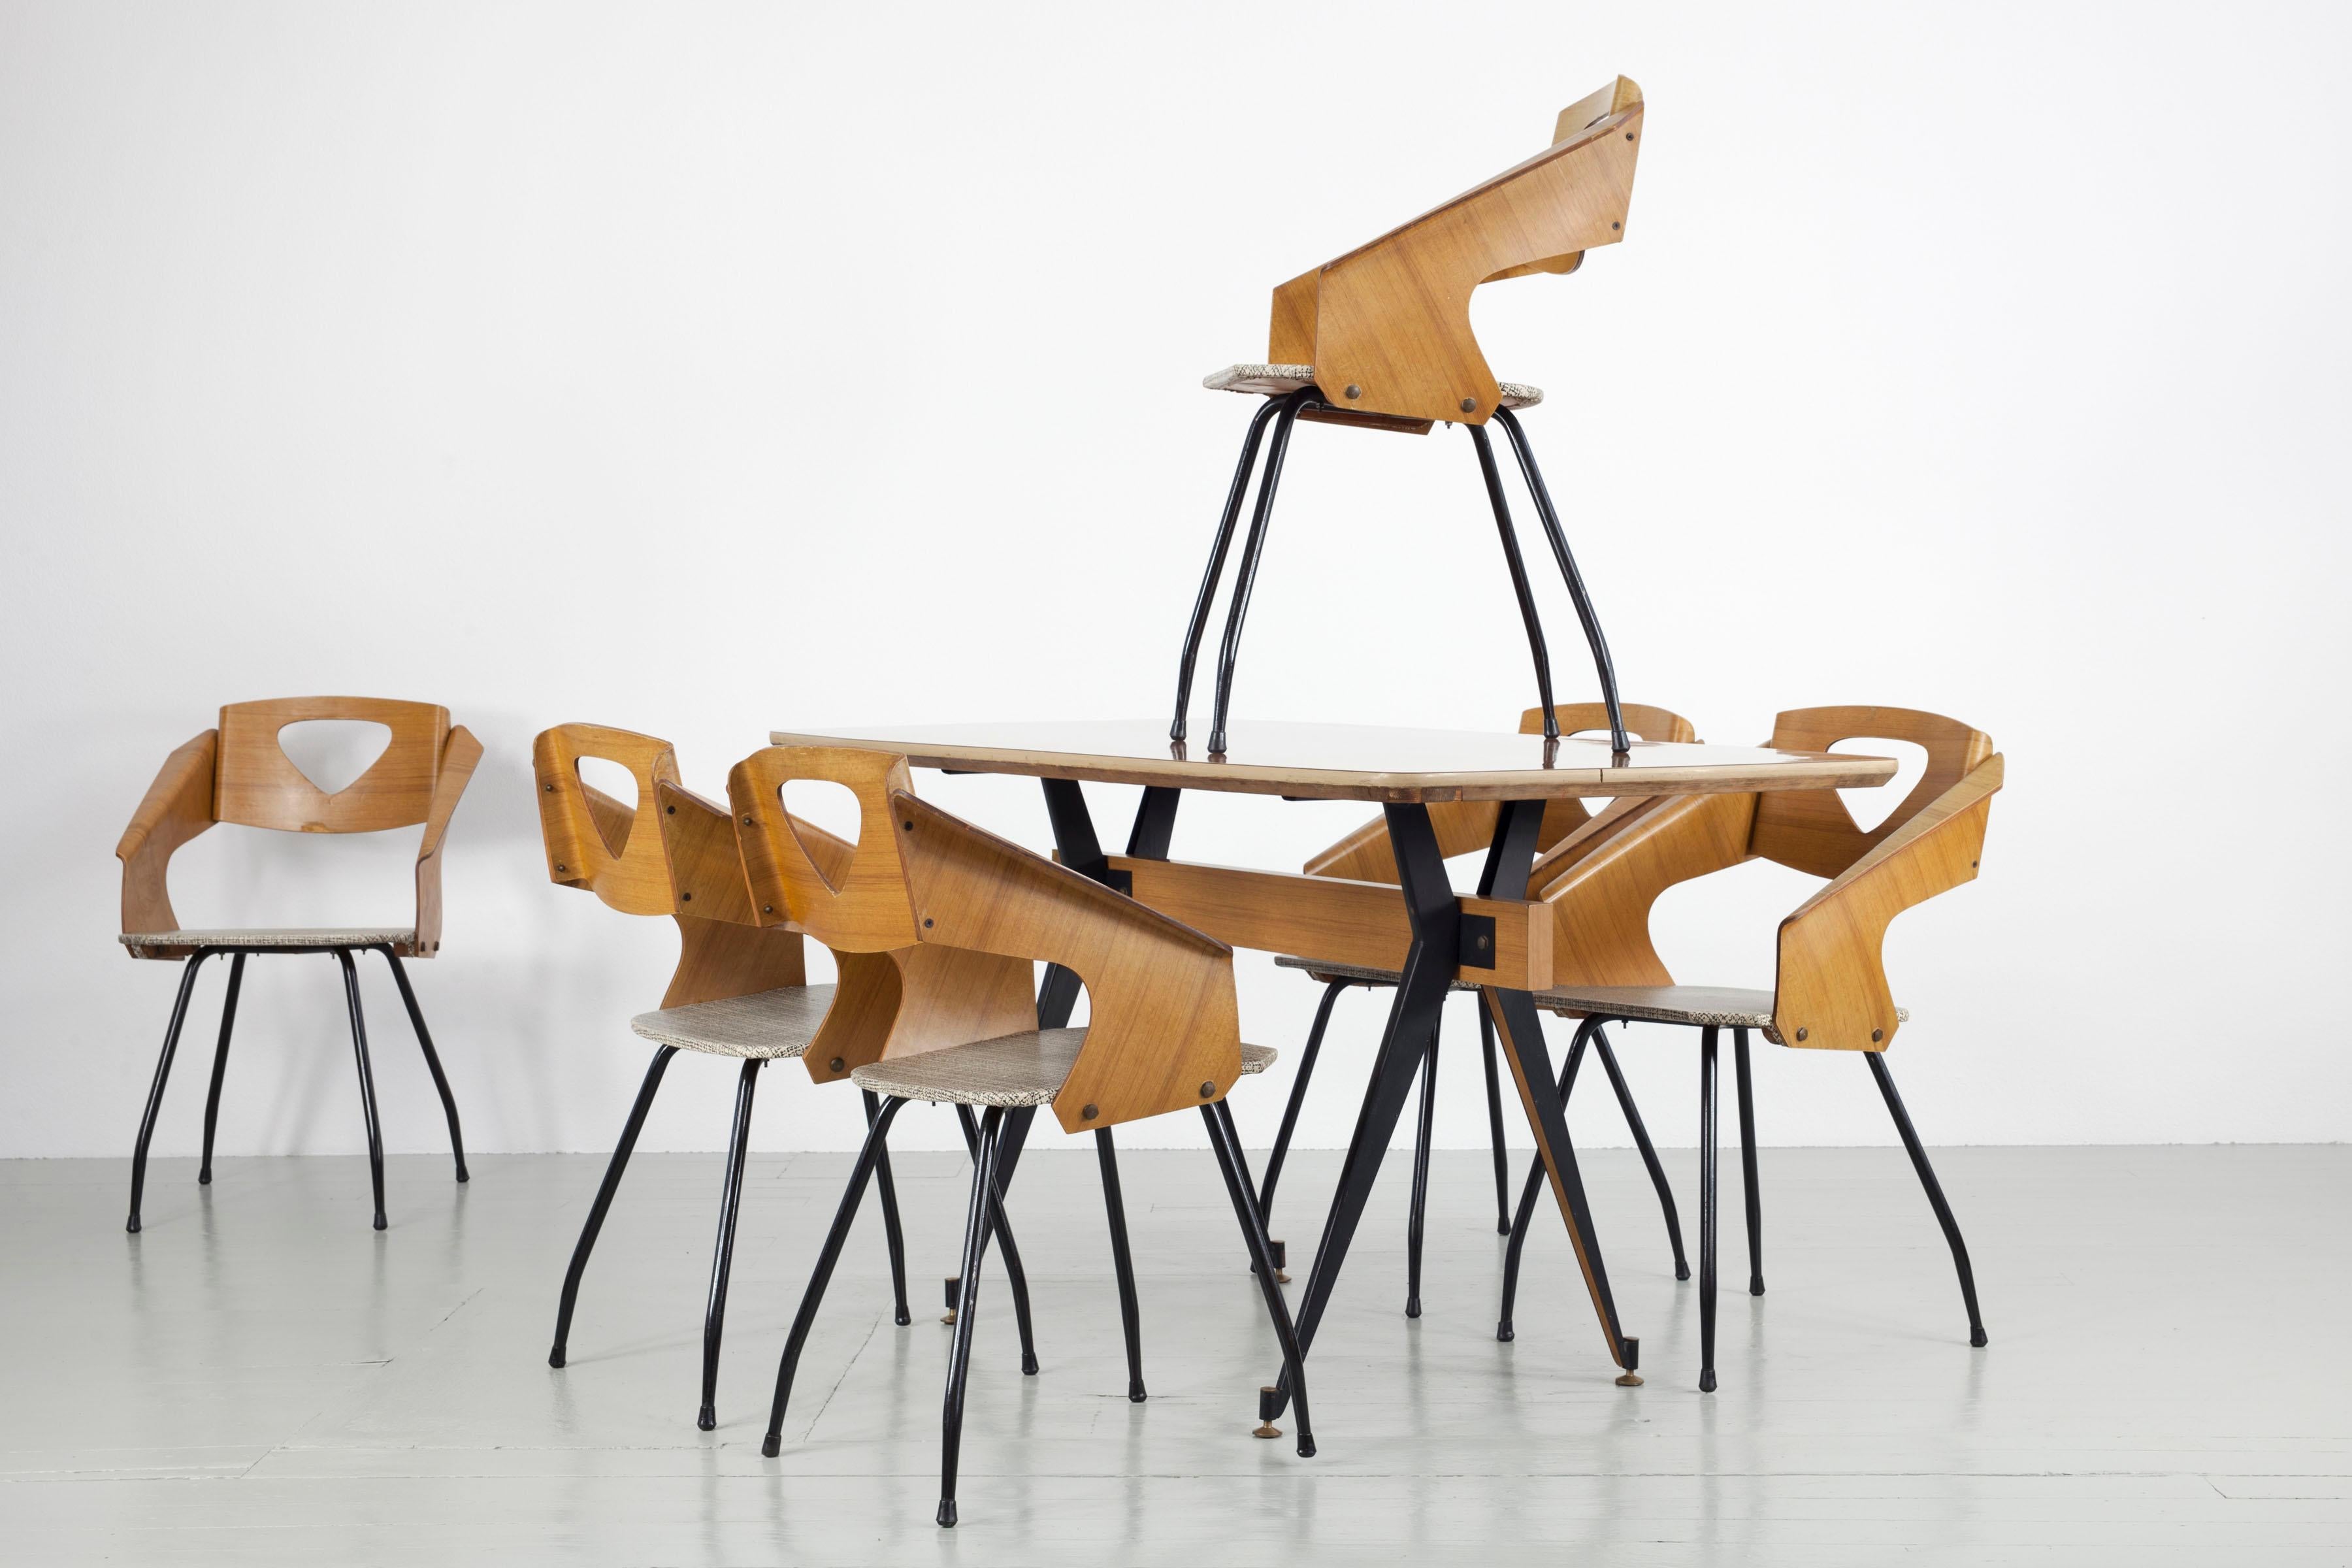 Set of 6 Dining Chairs and Table by Carlo Ratti, 1950s For Sale 1